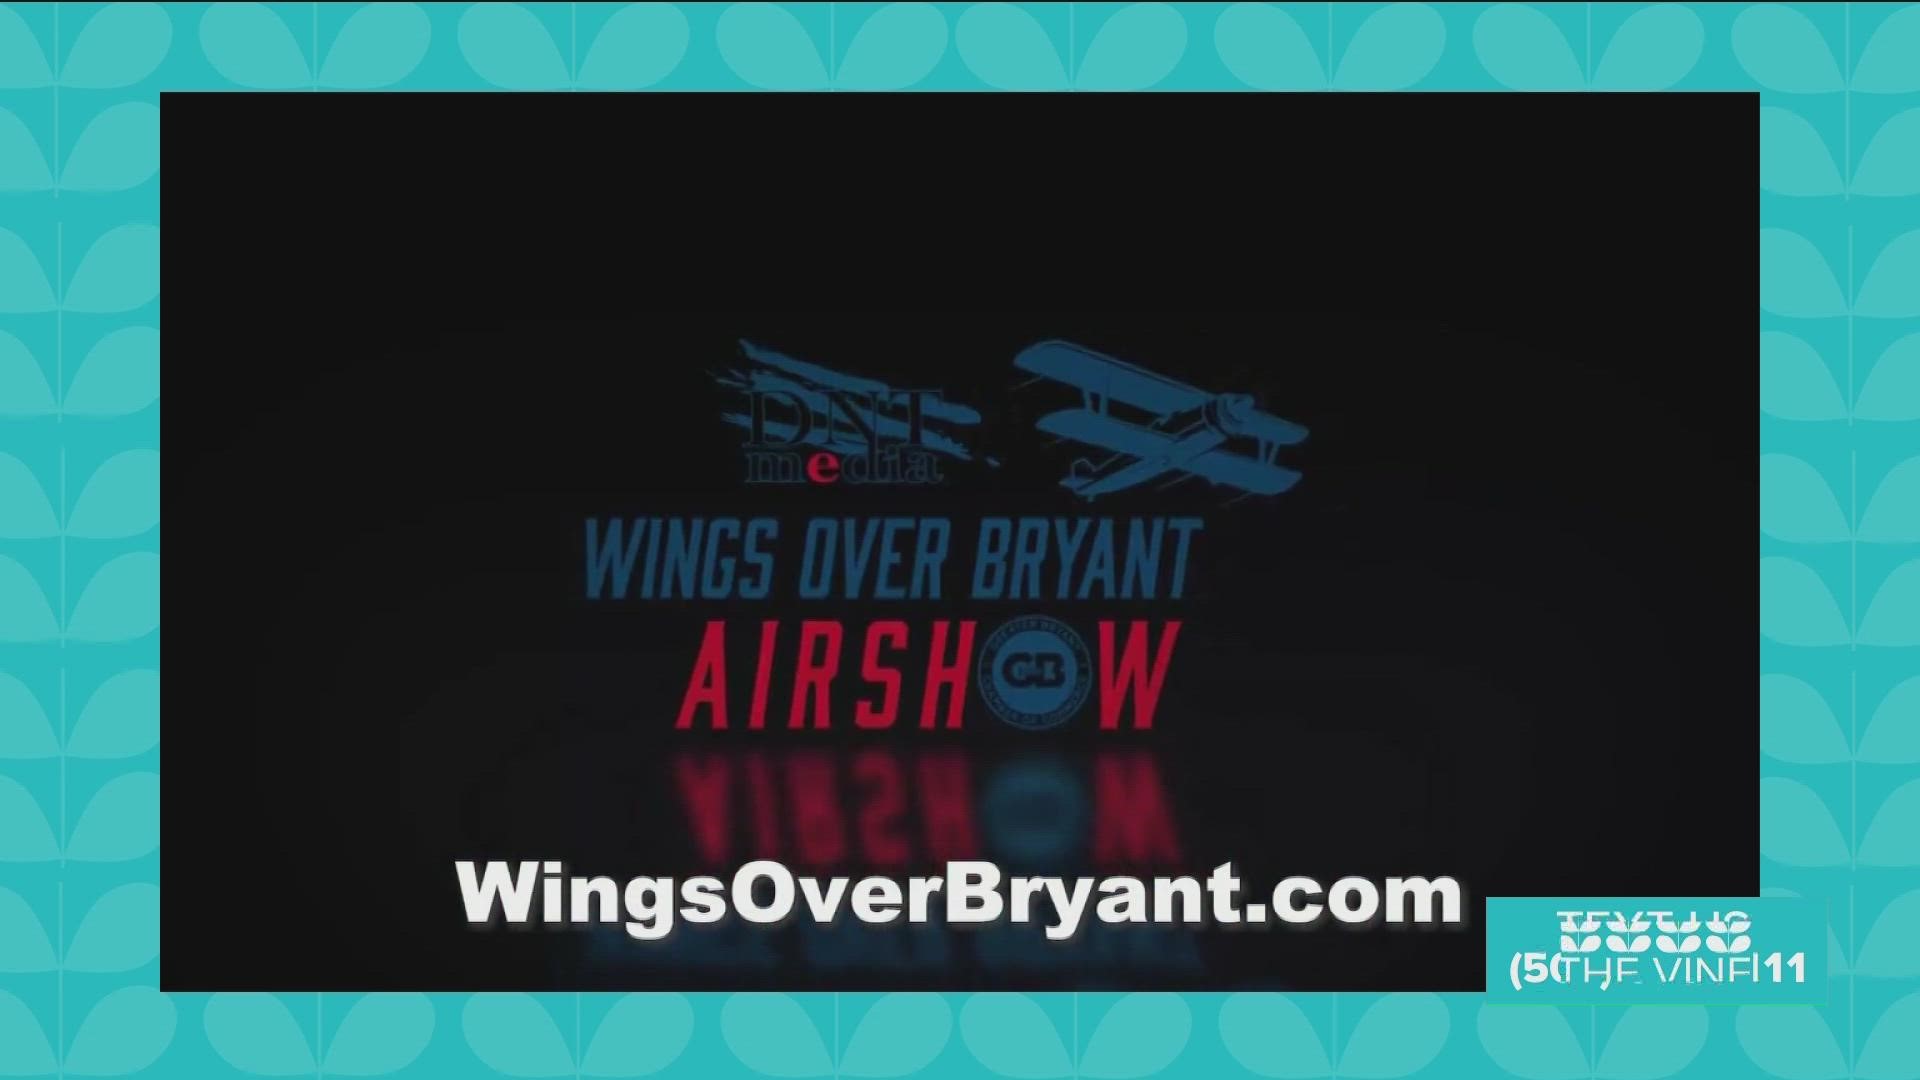 Wings Over Bryant is returning to Saline County for its second year and organizers are planning an even bigger and better celebration of aeronautics.